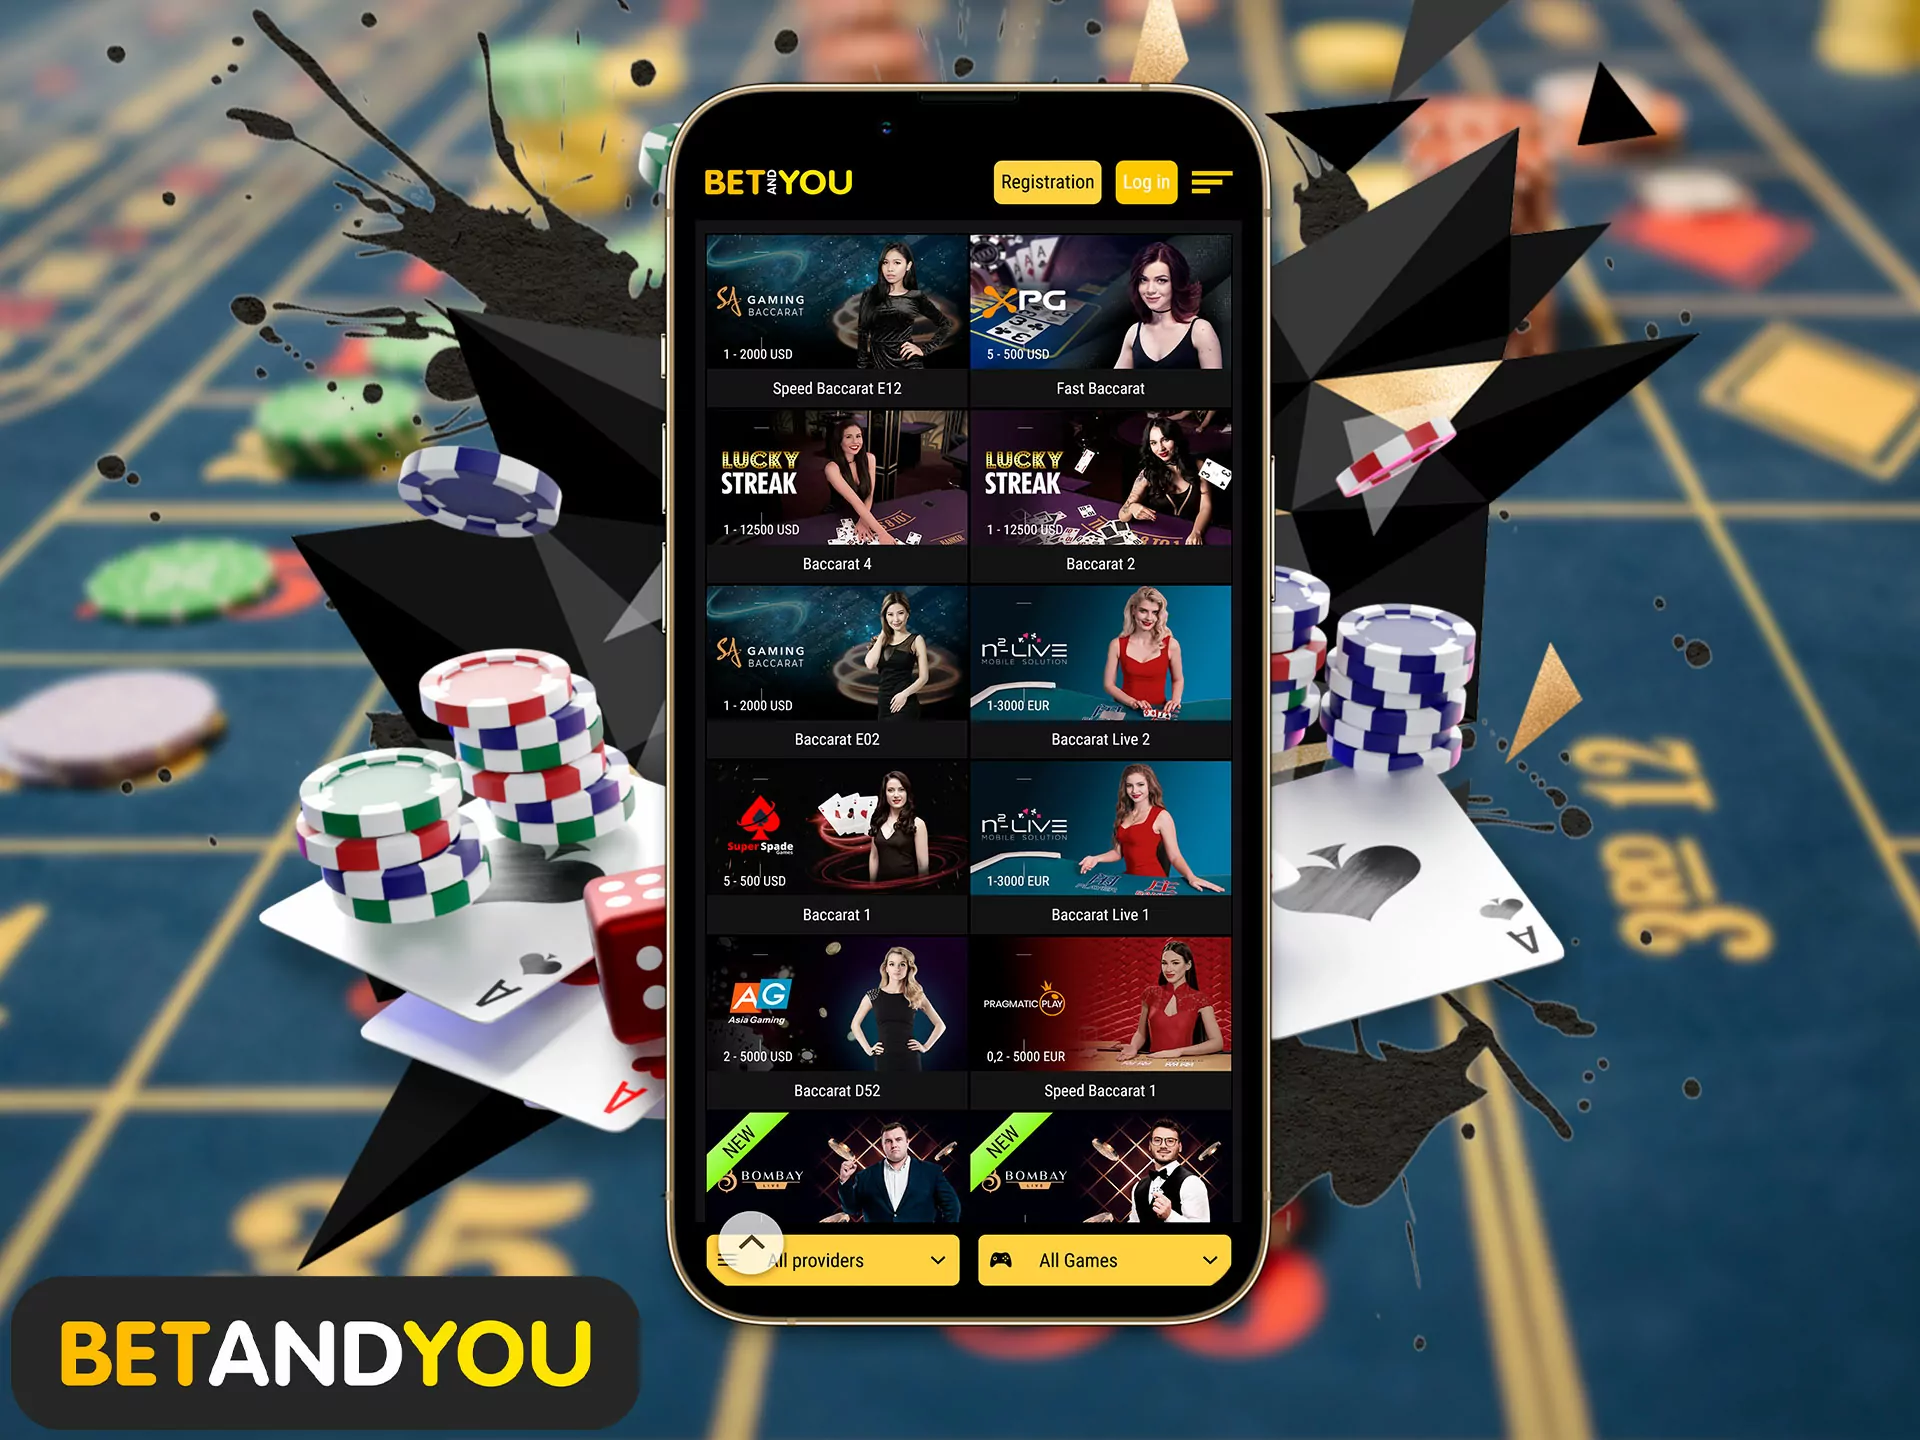 It is difficult to assess the role of this game on the market, Betandyou players are dealt cards, to win the player needs to collect a combination close to or equal to nine.